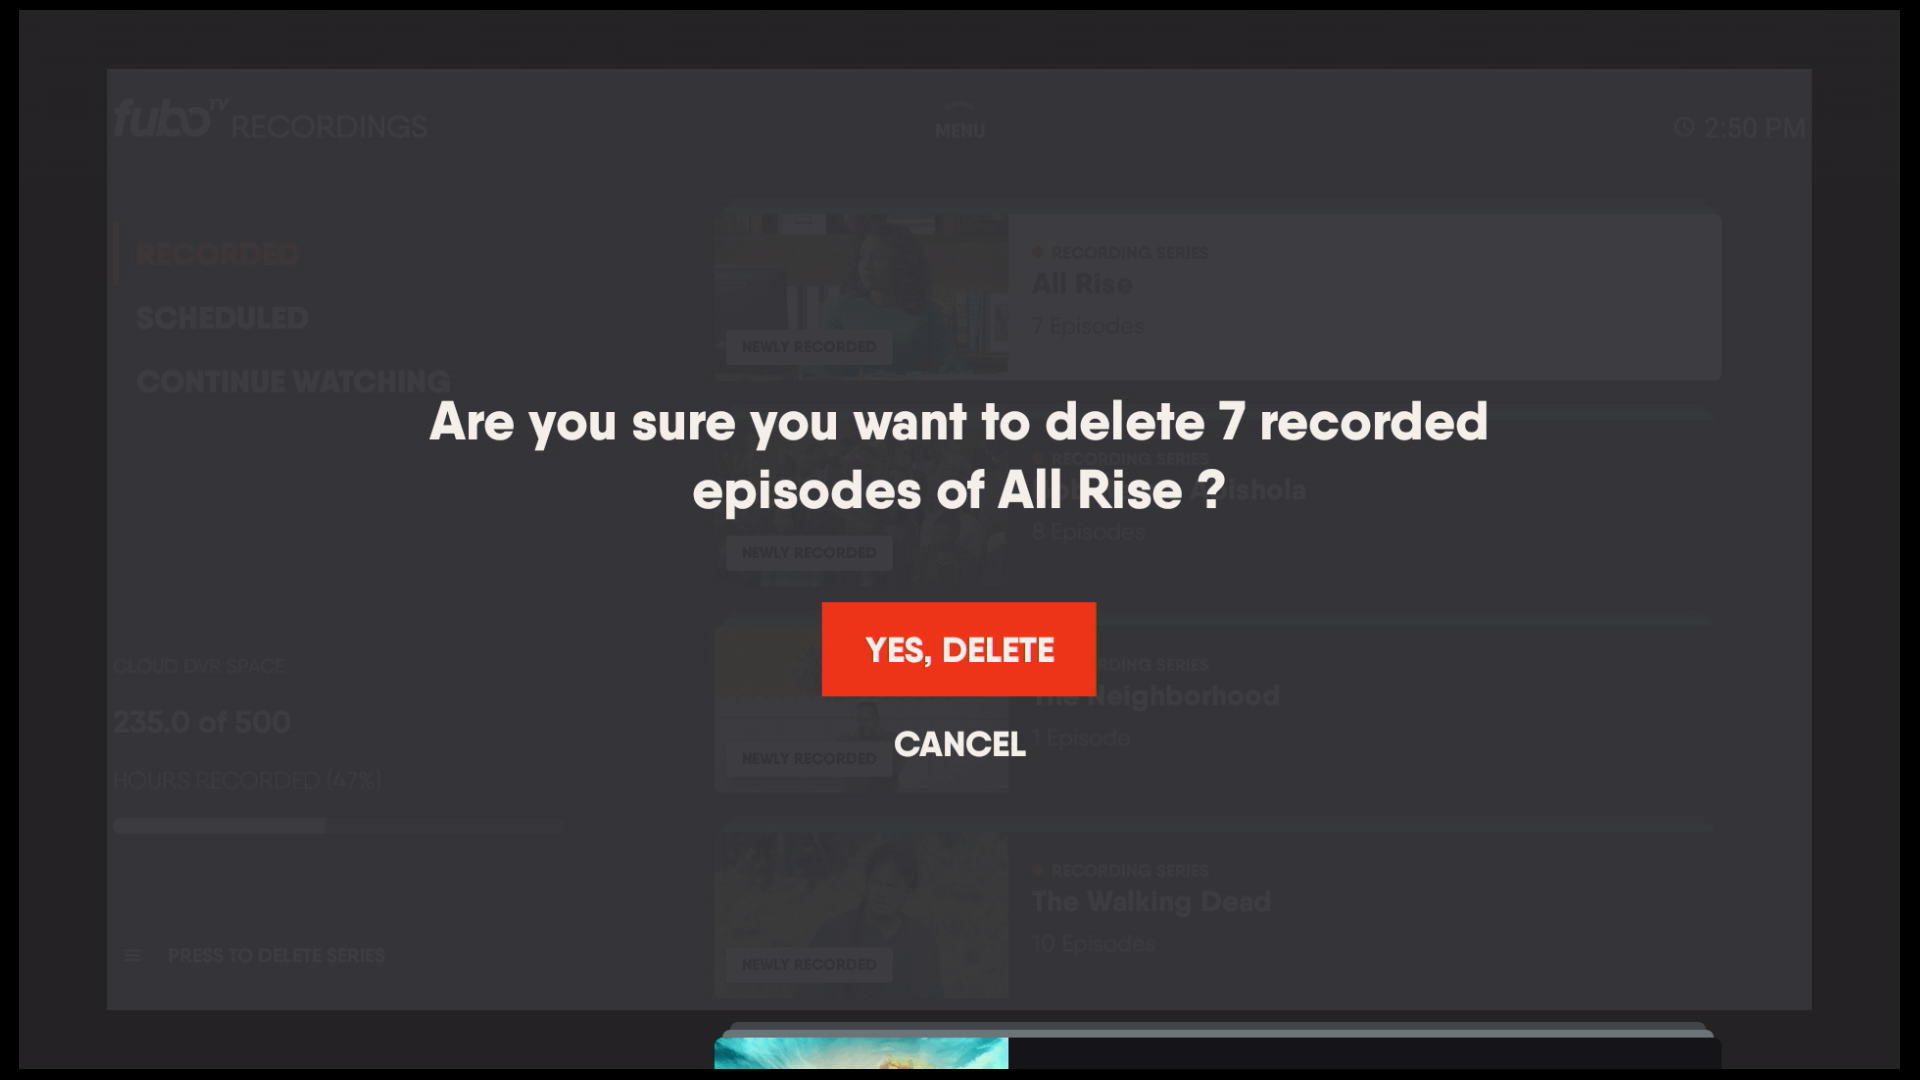 Delete recordings confirmation screen with Yes, Delete highlighted